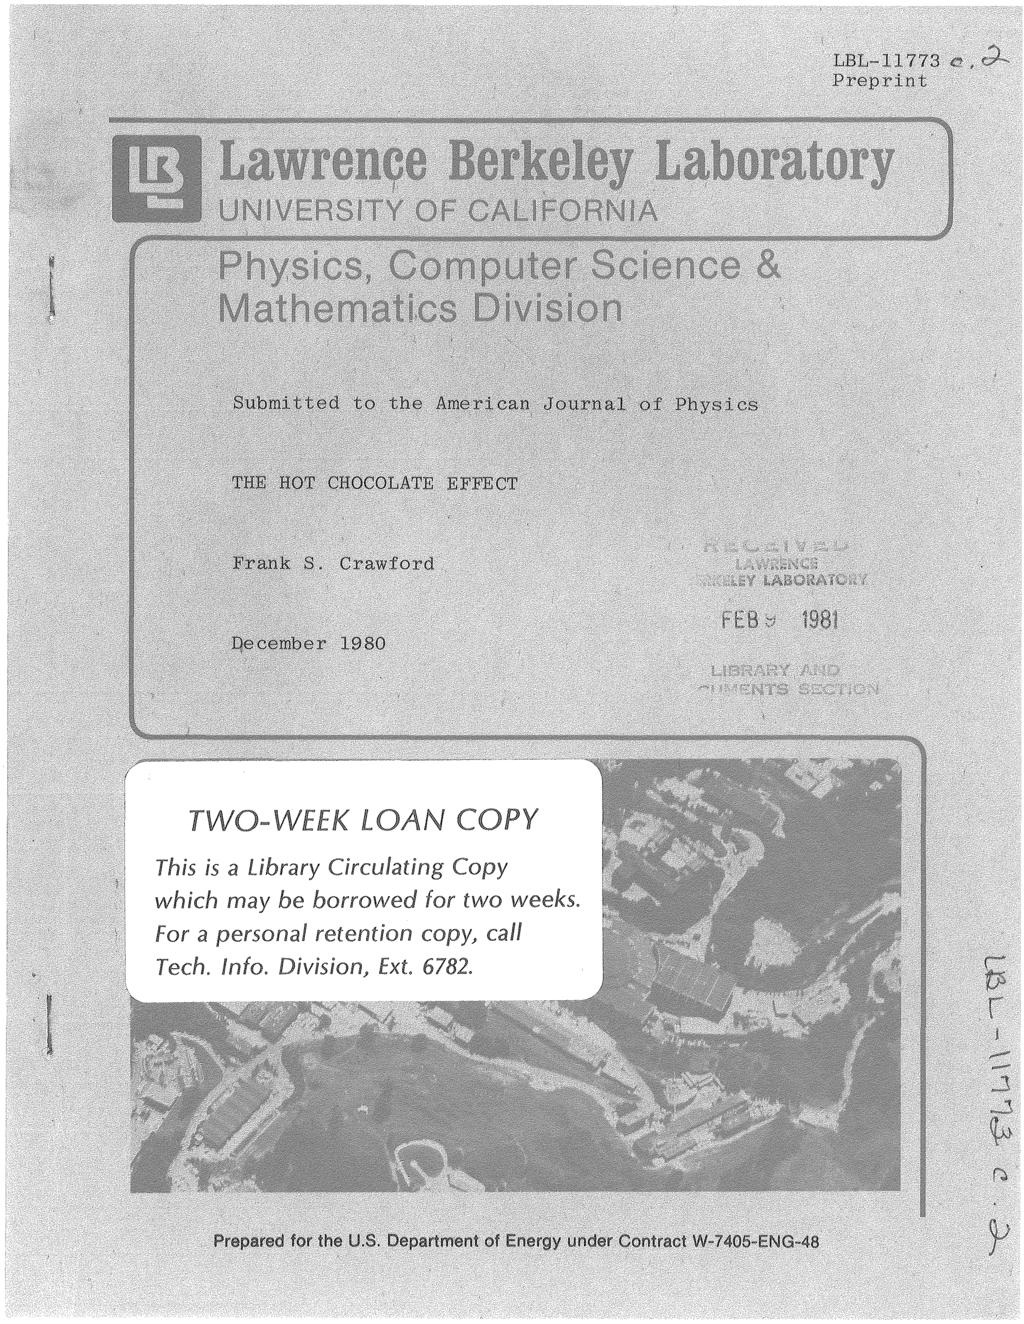 TWO-WEEK LOAN COPY This is Librry Copy which my be borrowed for